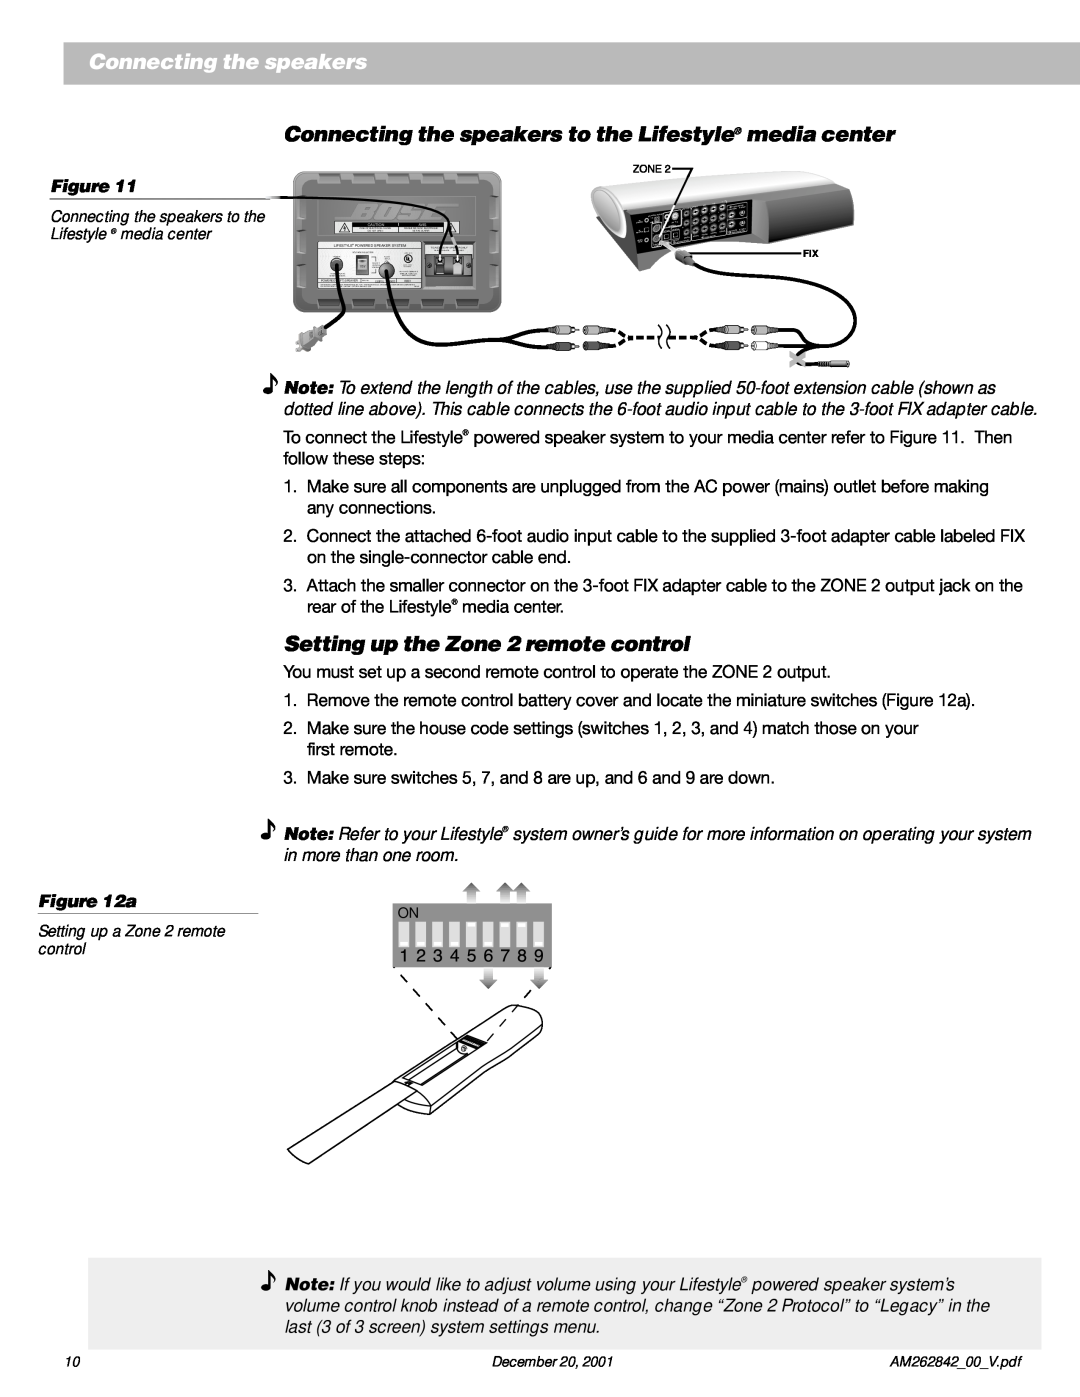 Bose Surround Sound Speaker System manual Setting up the Zone 2 remote control, Connecting the speakers 